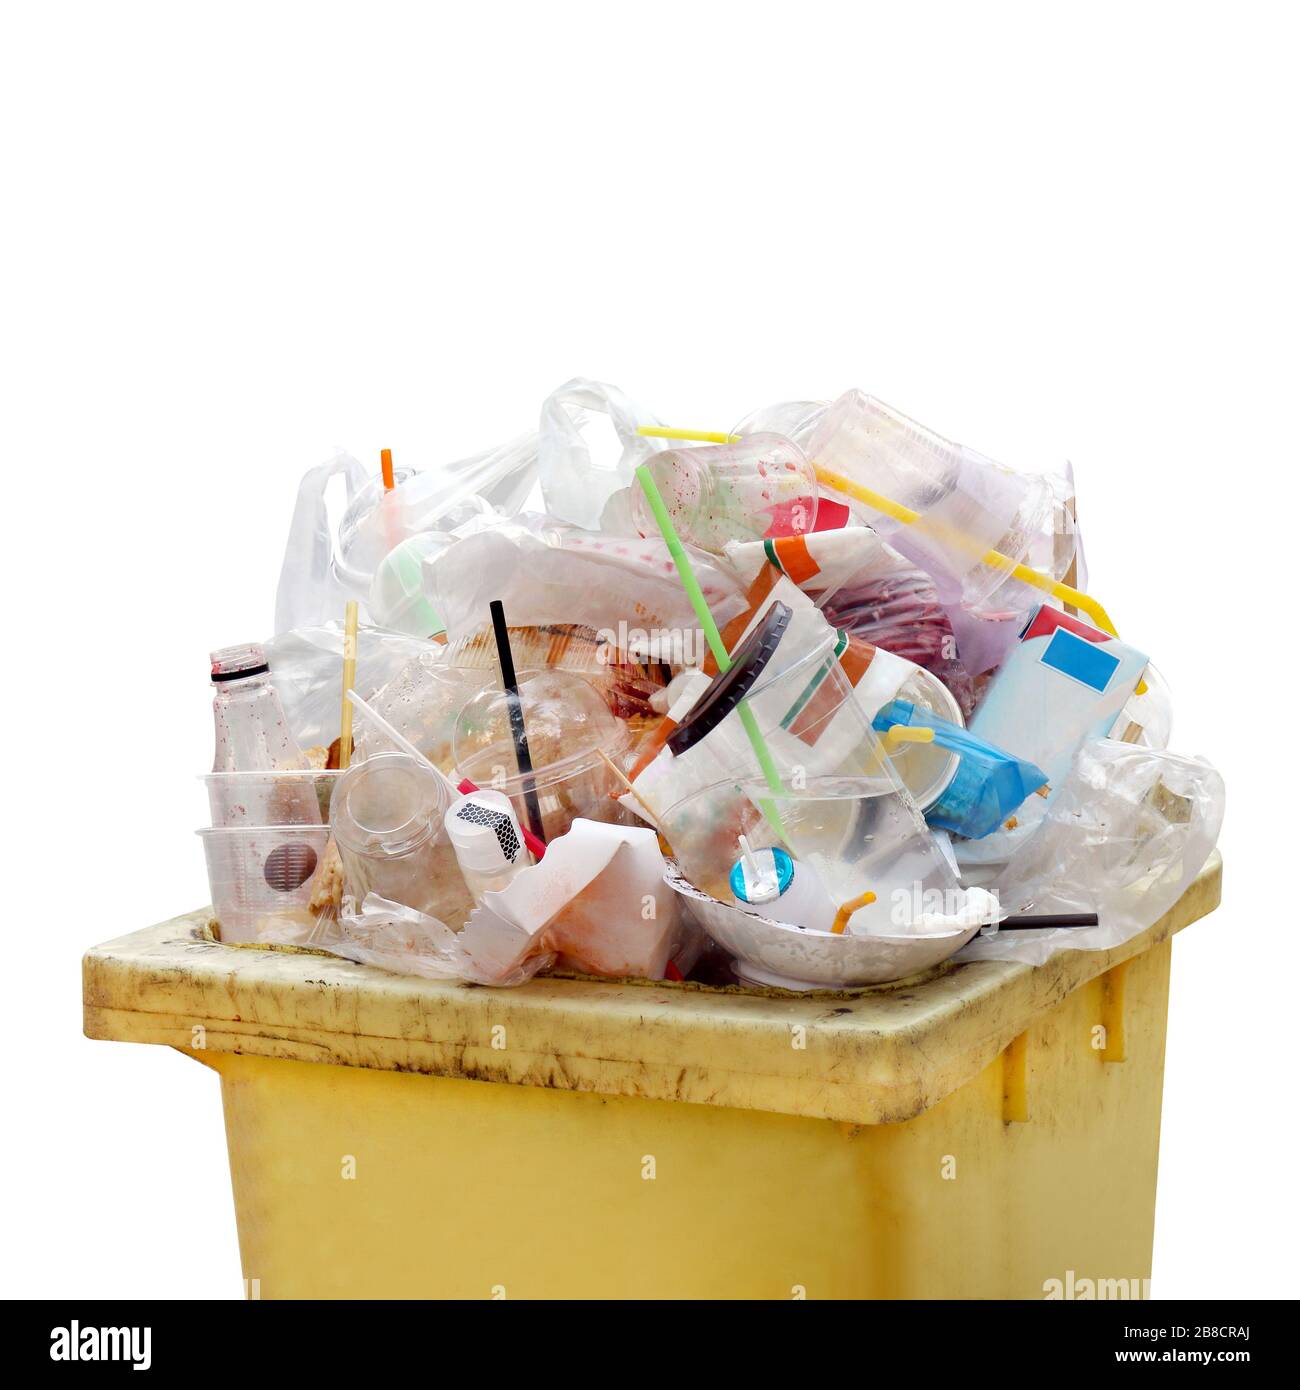 Waste heap, Waste Garbage trash plastic full of trash bin yellow, Plastic bag waste Lots of junk isolated on white background, Garbage many close-up Stock Photo